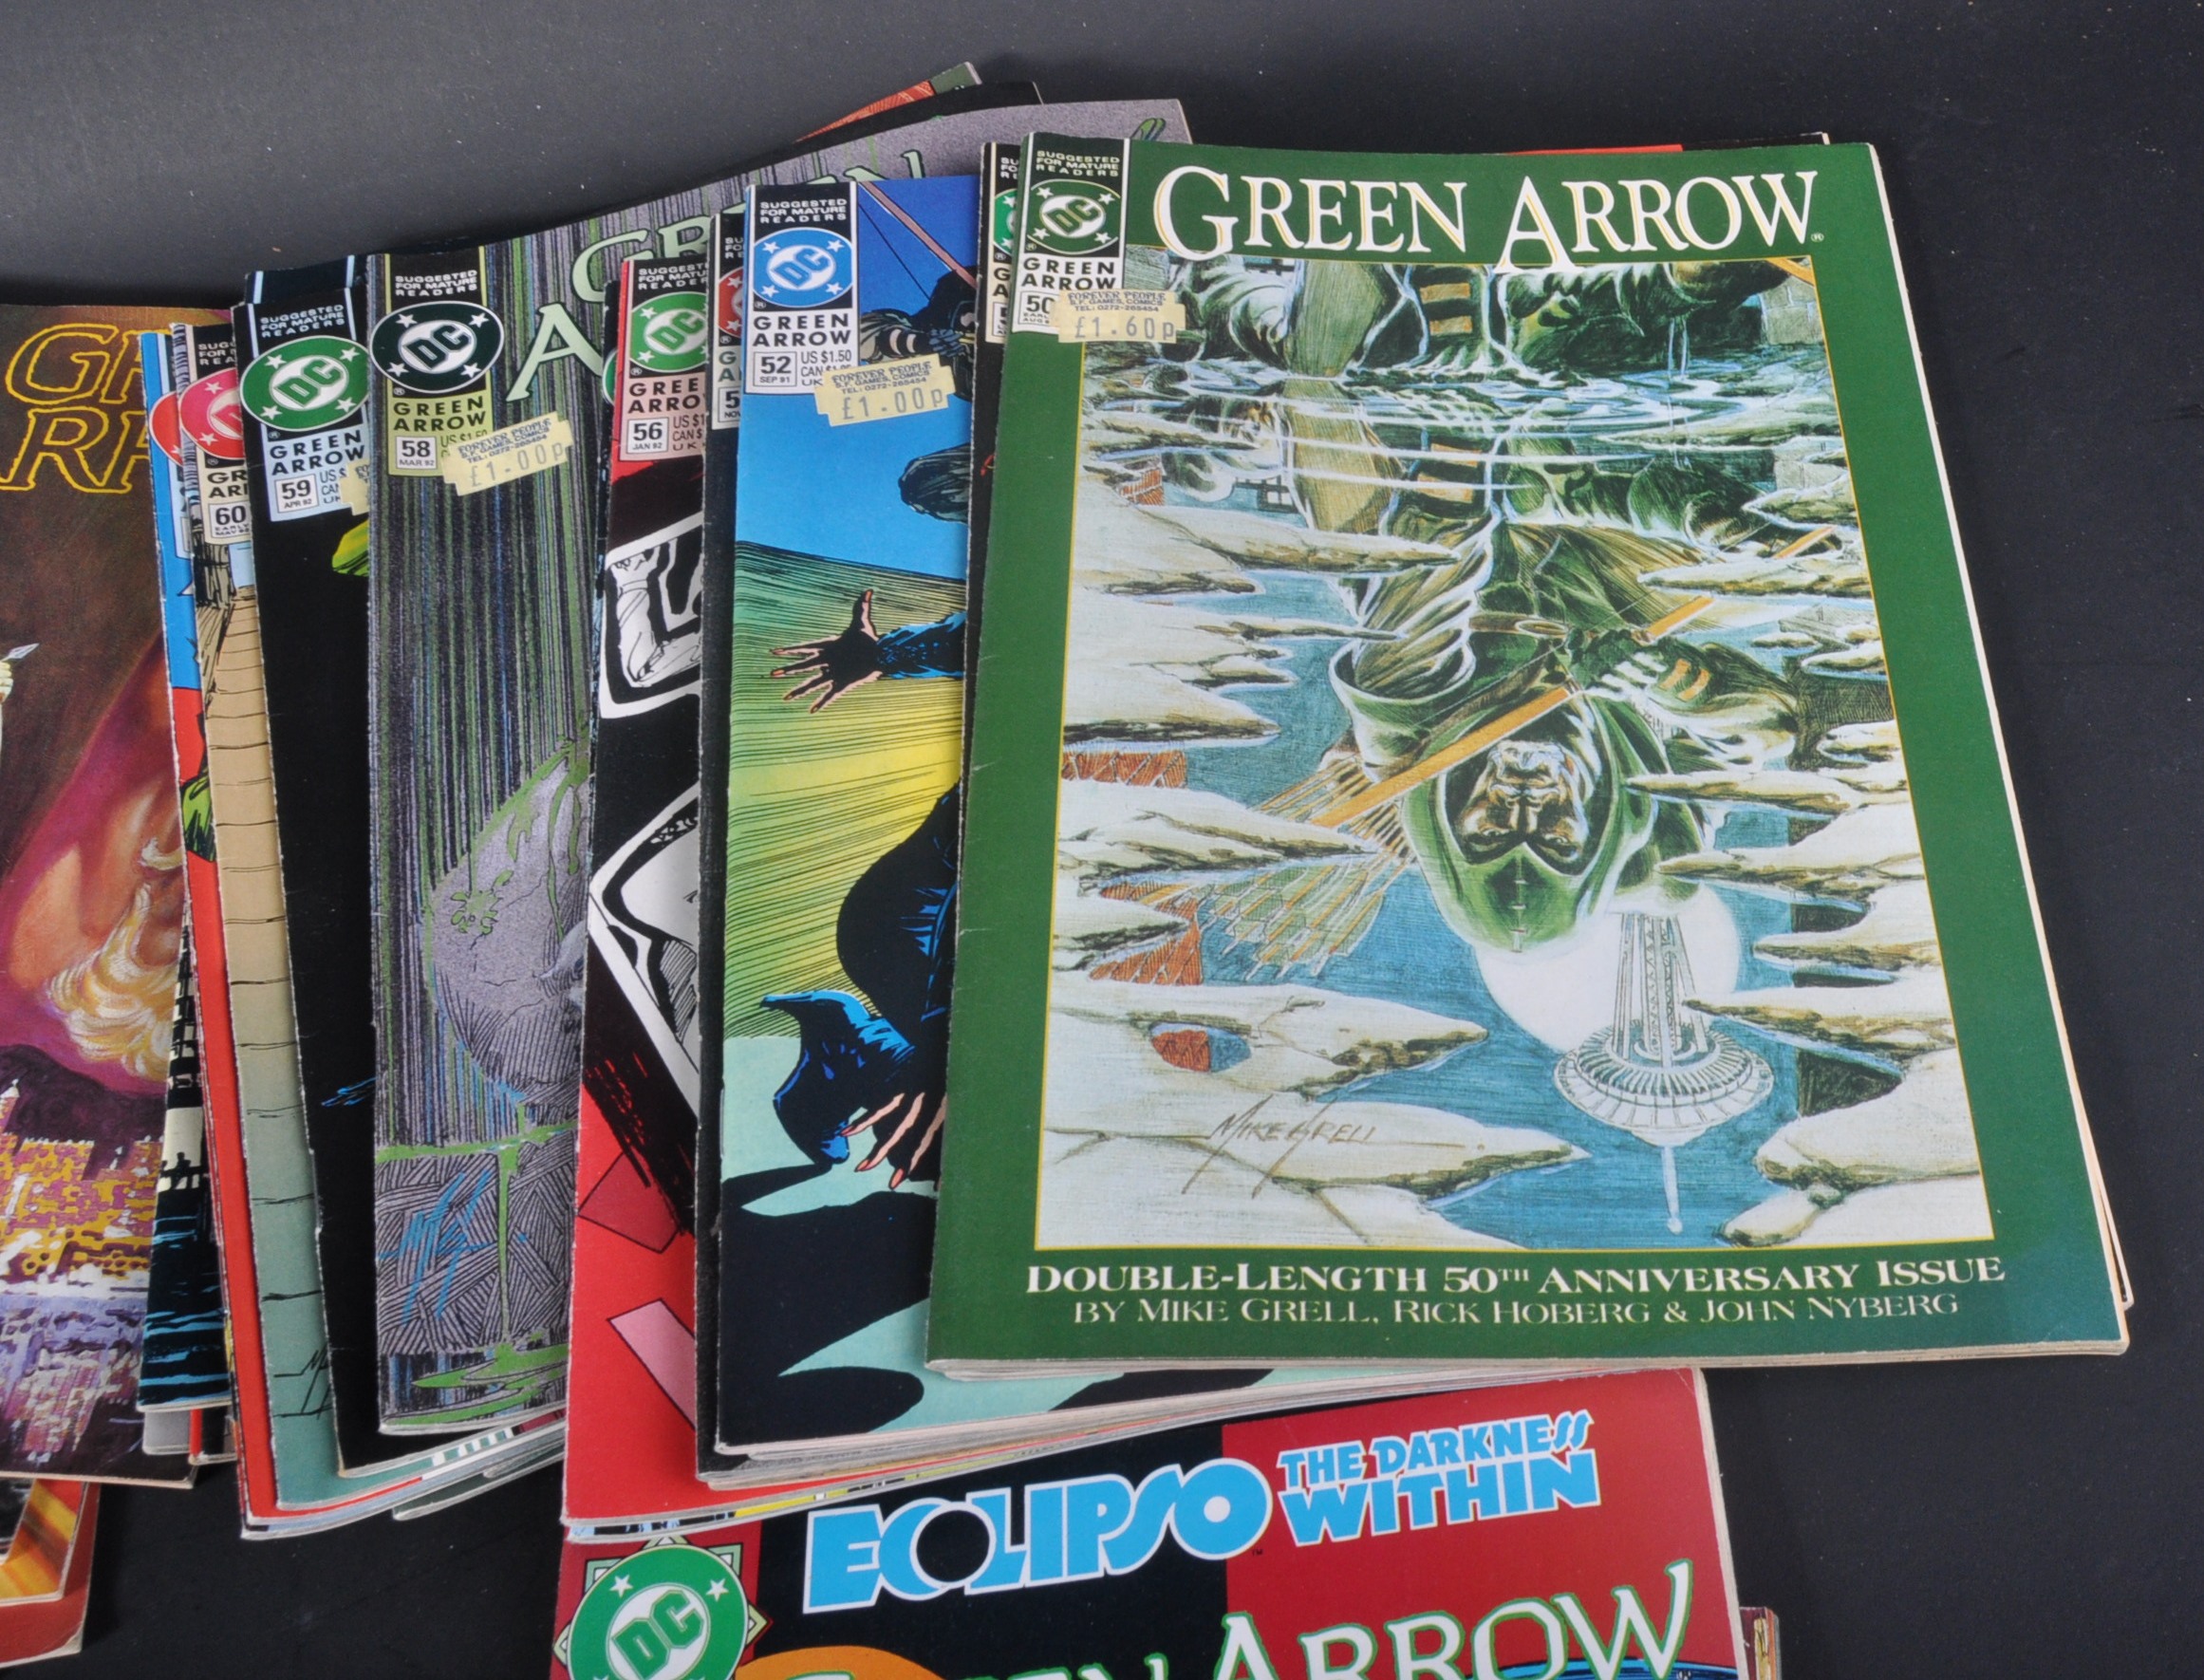 DC COMICS - GREEN ARROW - COLLECTION OF VINTAGE COMIC BOOKS - Image 6 of 6